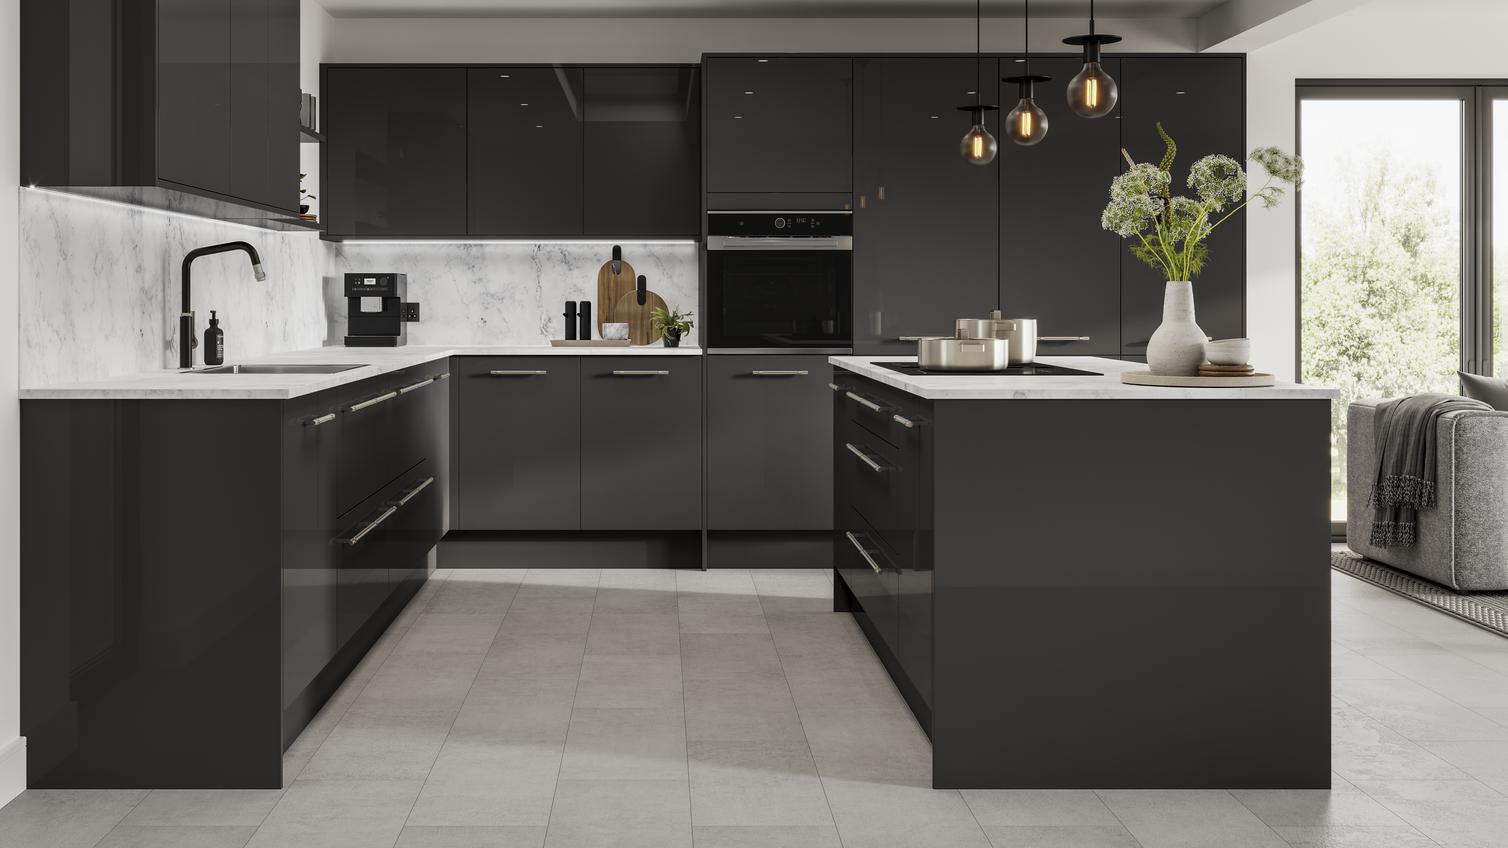 Black kitchen in an island layout with glossy slab cupboard doors, white worktops, and backboards for a monochrome look.